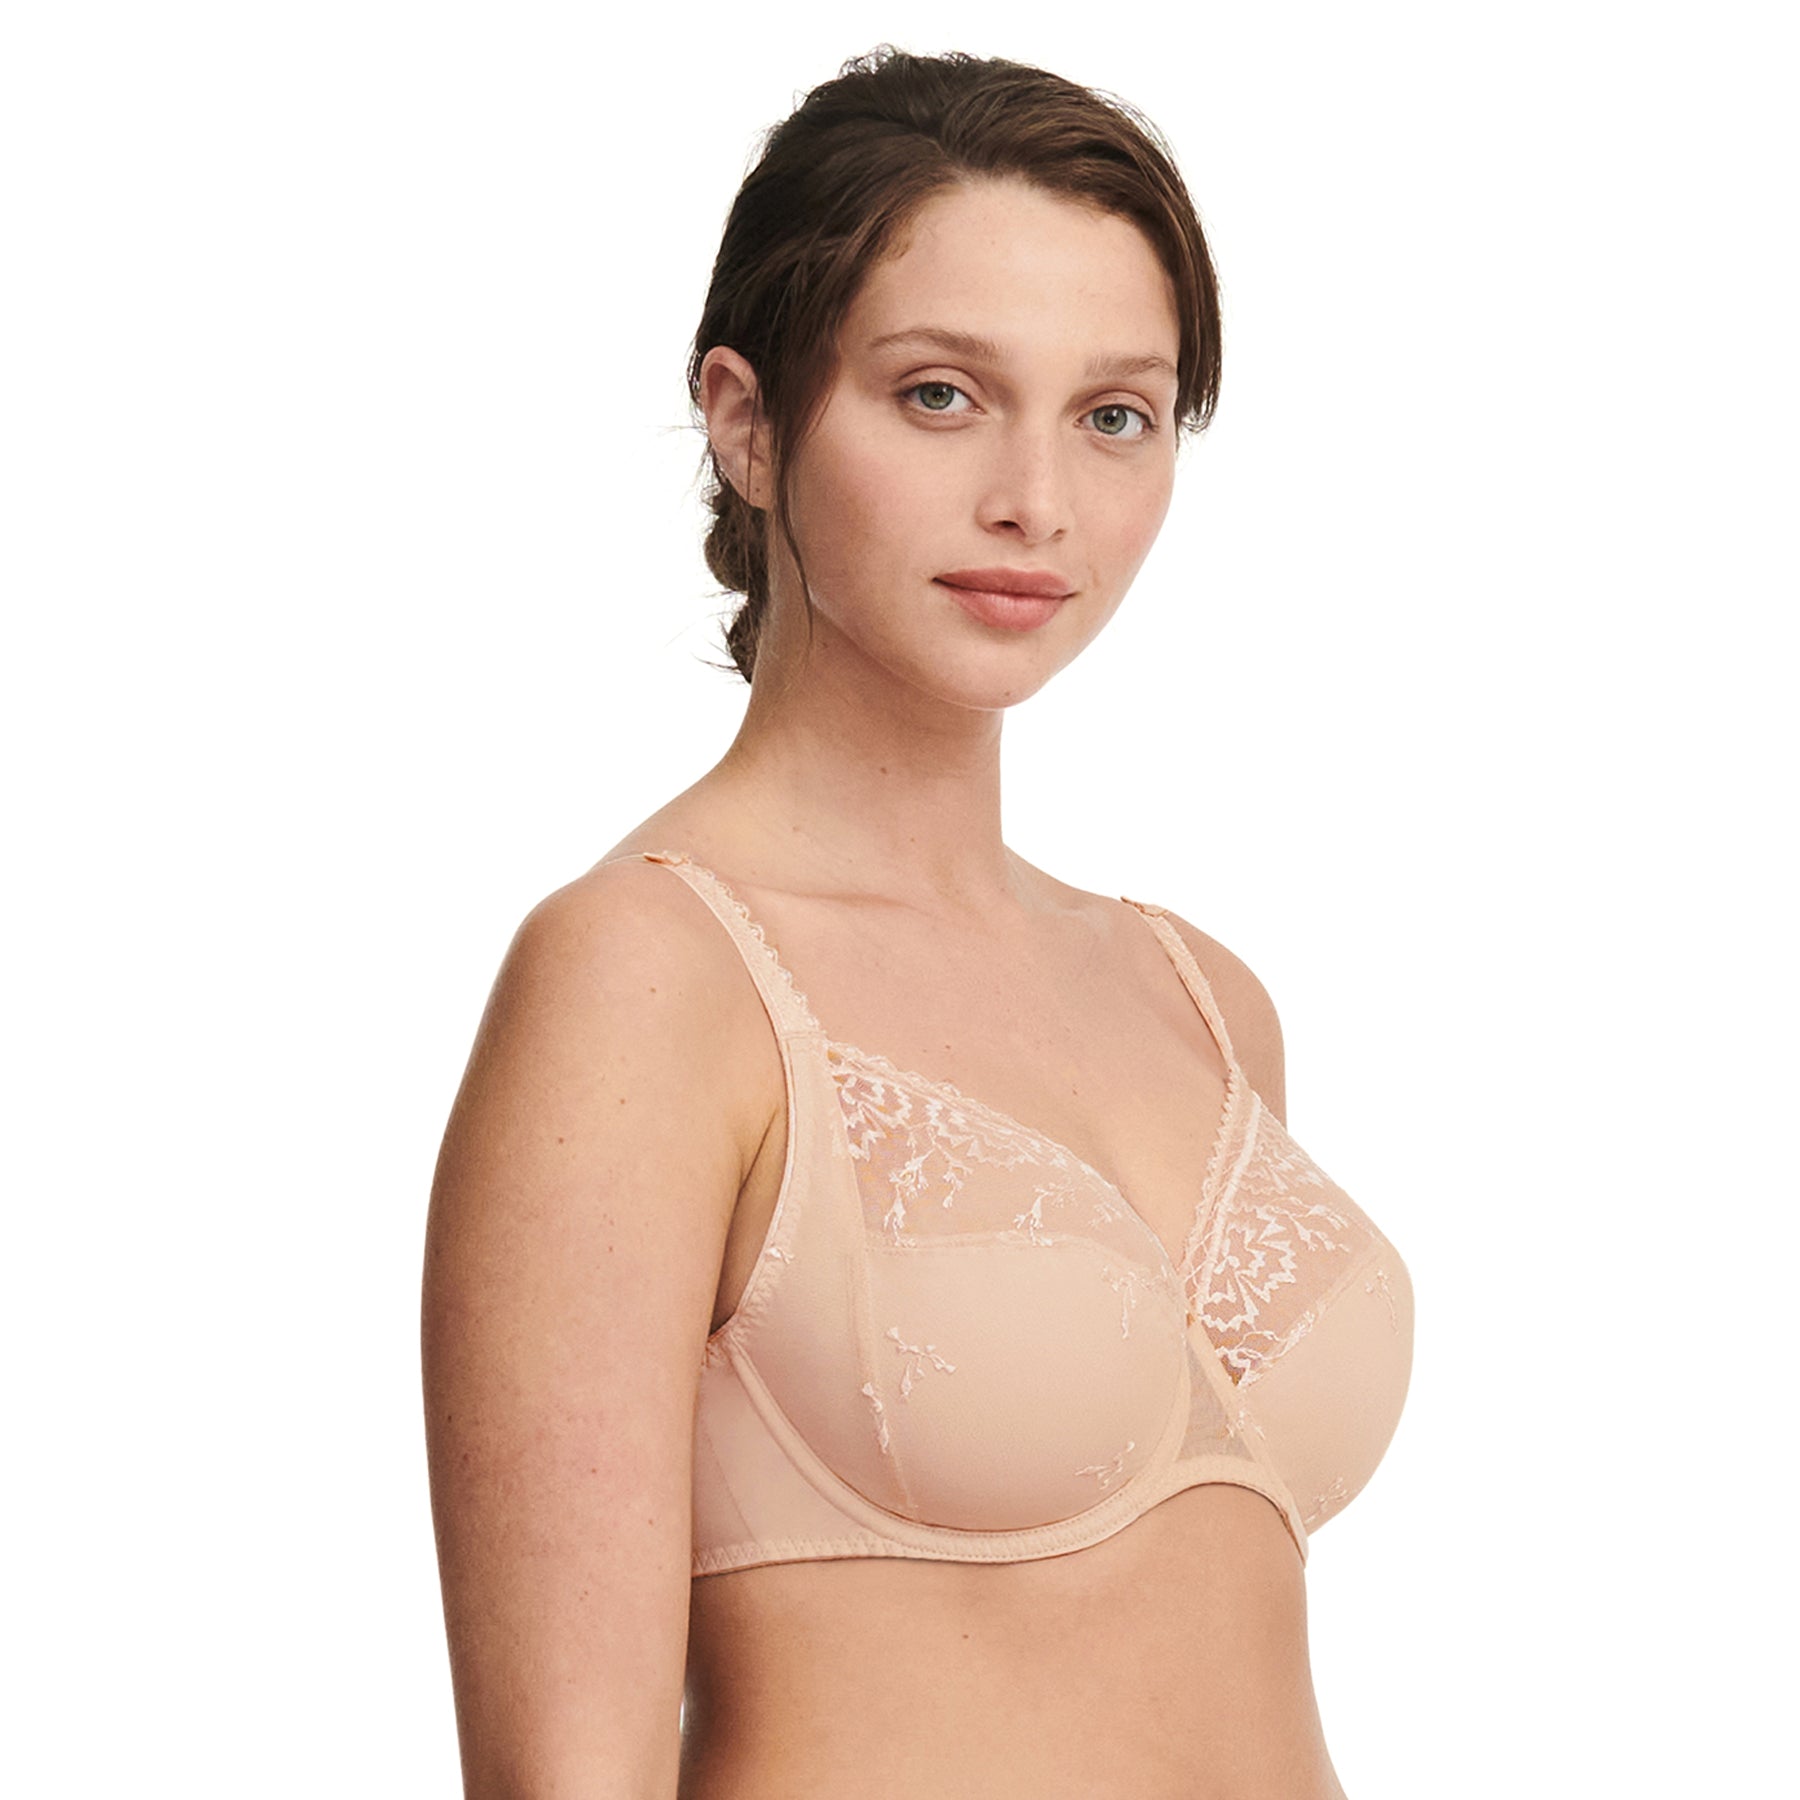 NuBra Seamless Bra Cups In Nude. - Size A (Also In B, C) for Women